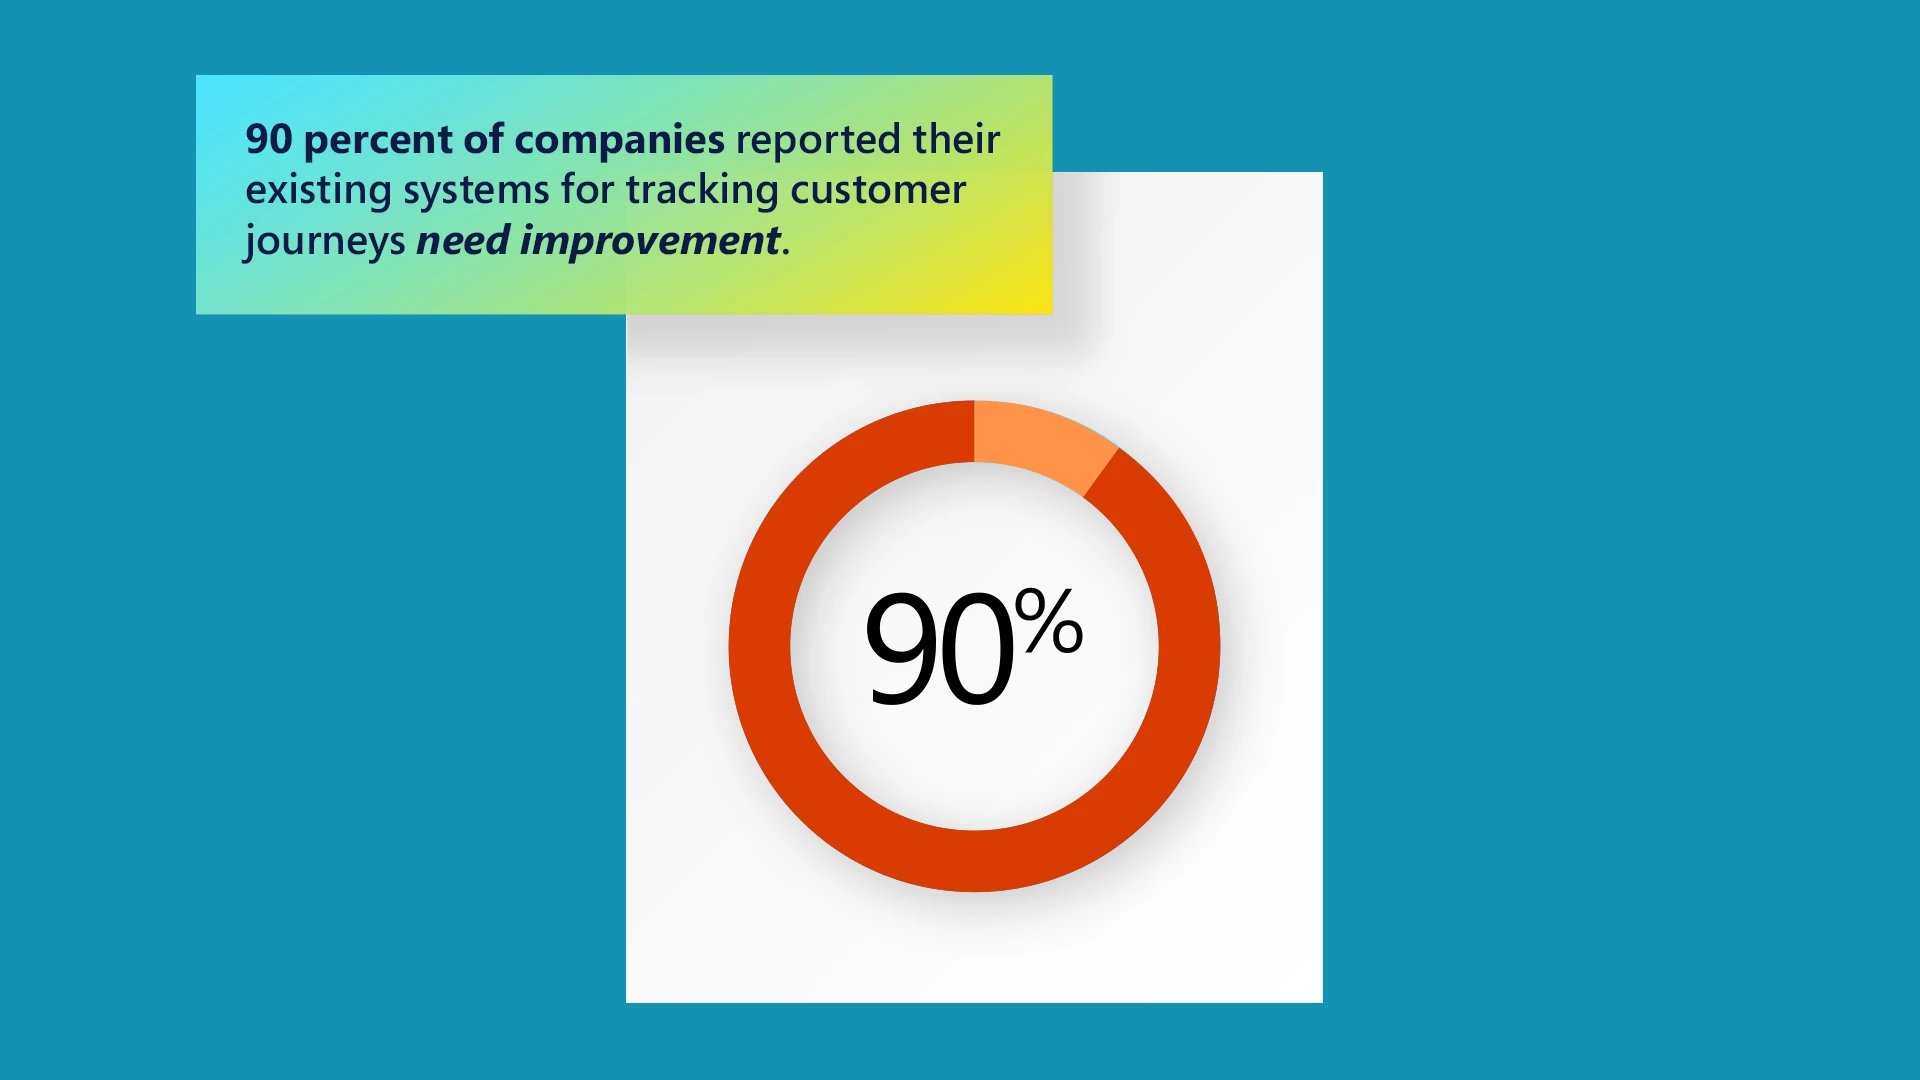 Graphic depicting that 90% of companies reported their existing systems for tracking customer journeys need improvement.